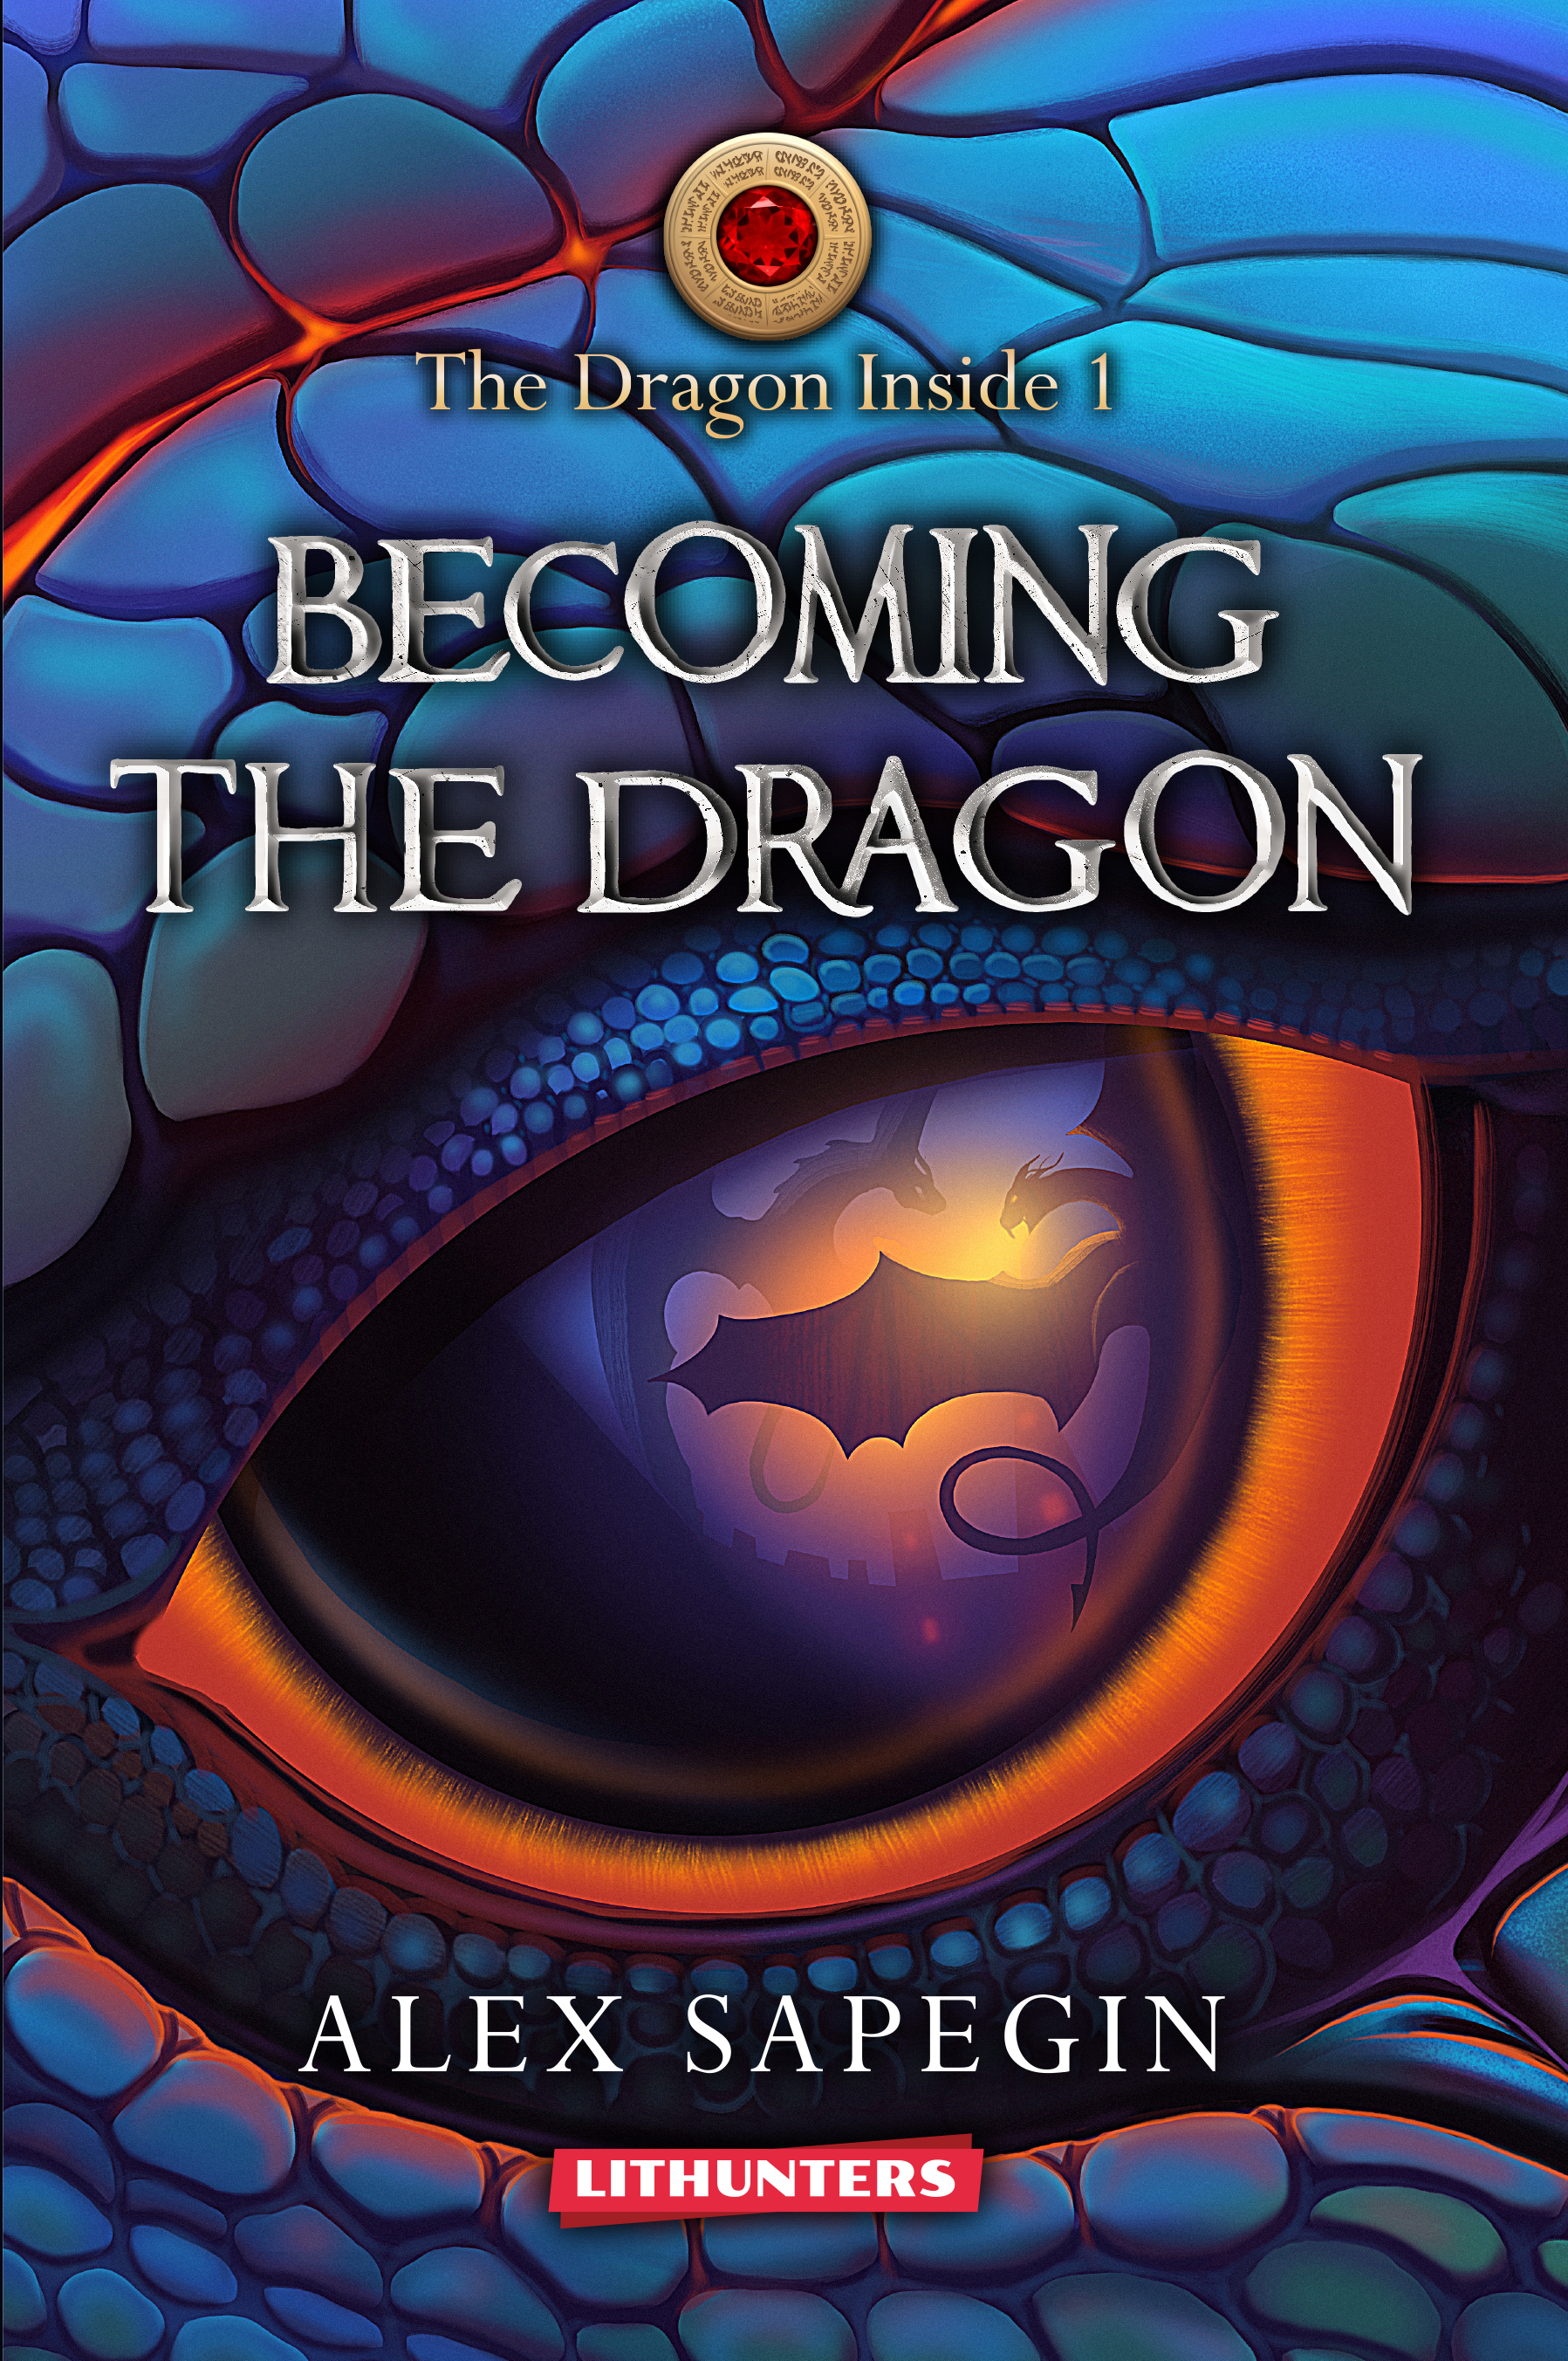 FREE: The Dragon Inside: Becoming the Dragon by Alex Sapegin